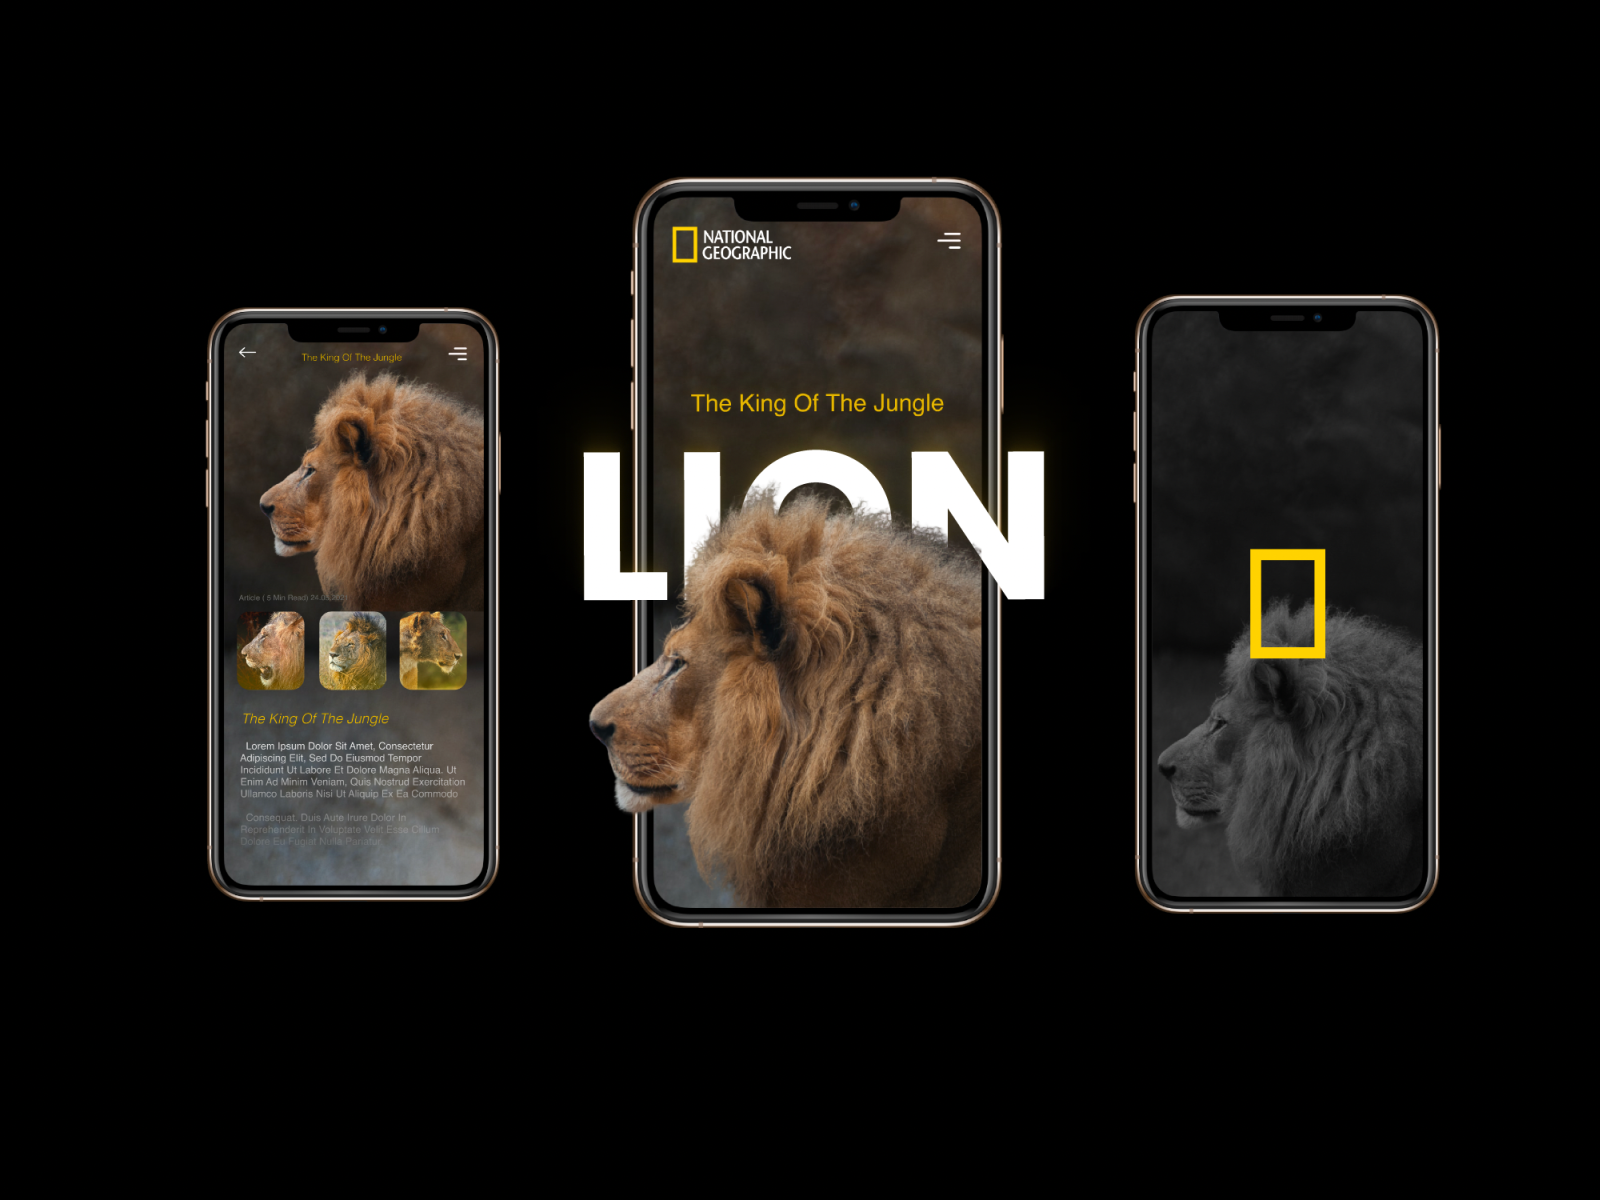 National Geographic App by Sansa on Dribbble